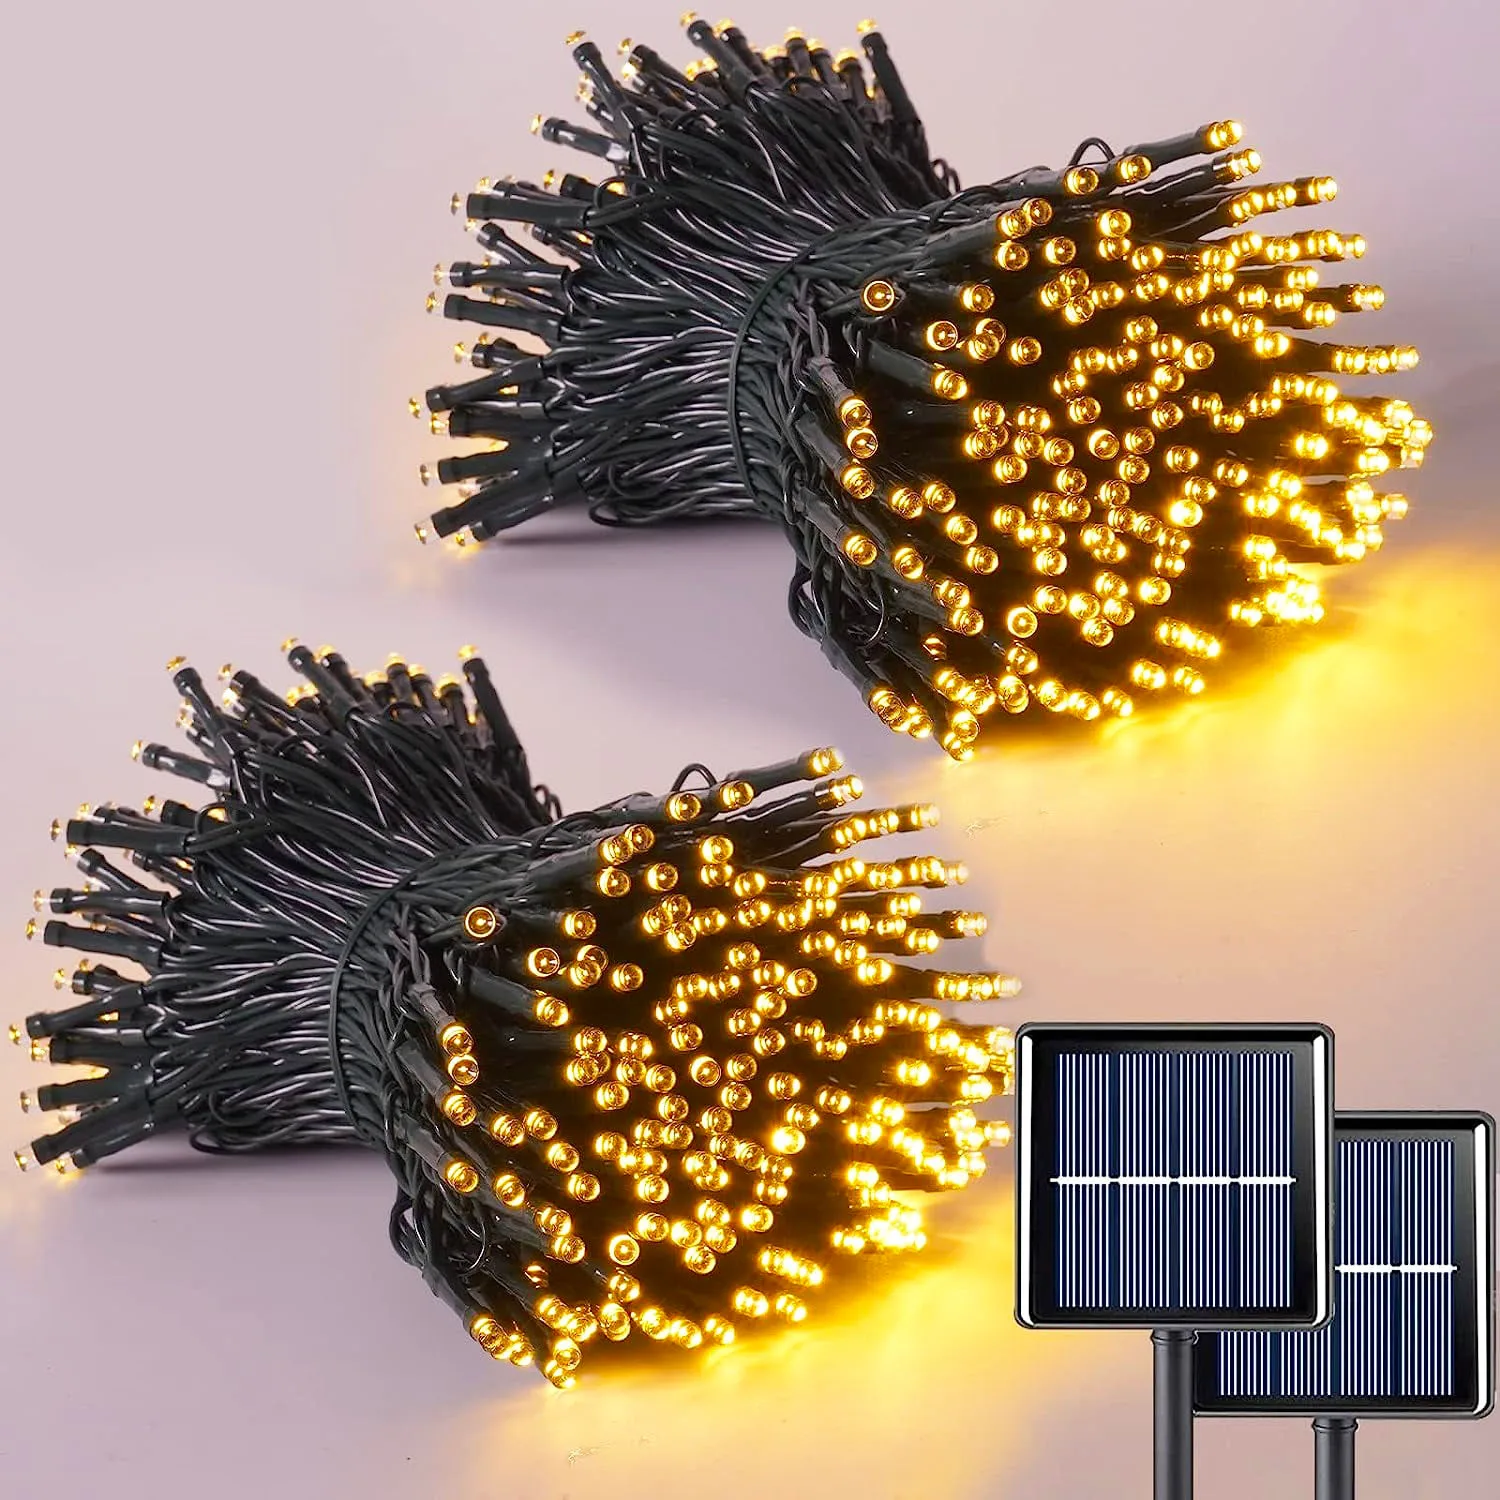 2Pack Solar String Lights Outdoor Waterproof Fairy Christmas Twinkle Lights with 8 Modes Tree Lights for Outdoor Garden Patio 72 led solar wall light 3 modes outdoor solar light with motion sensor waterproof three sides luminous patio deck garden light